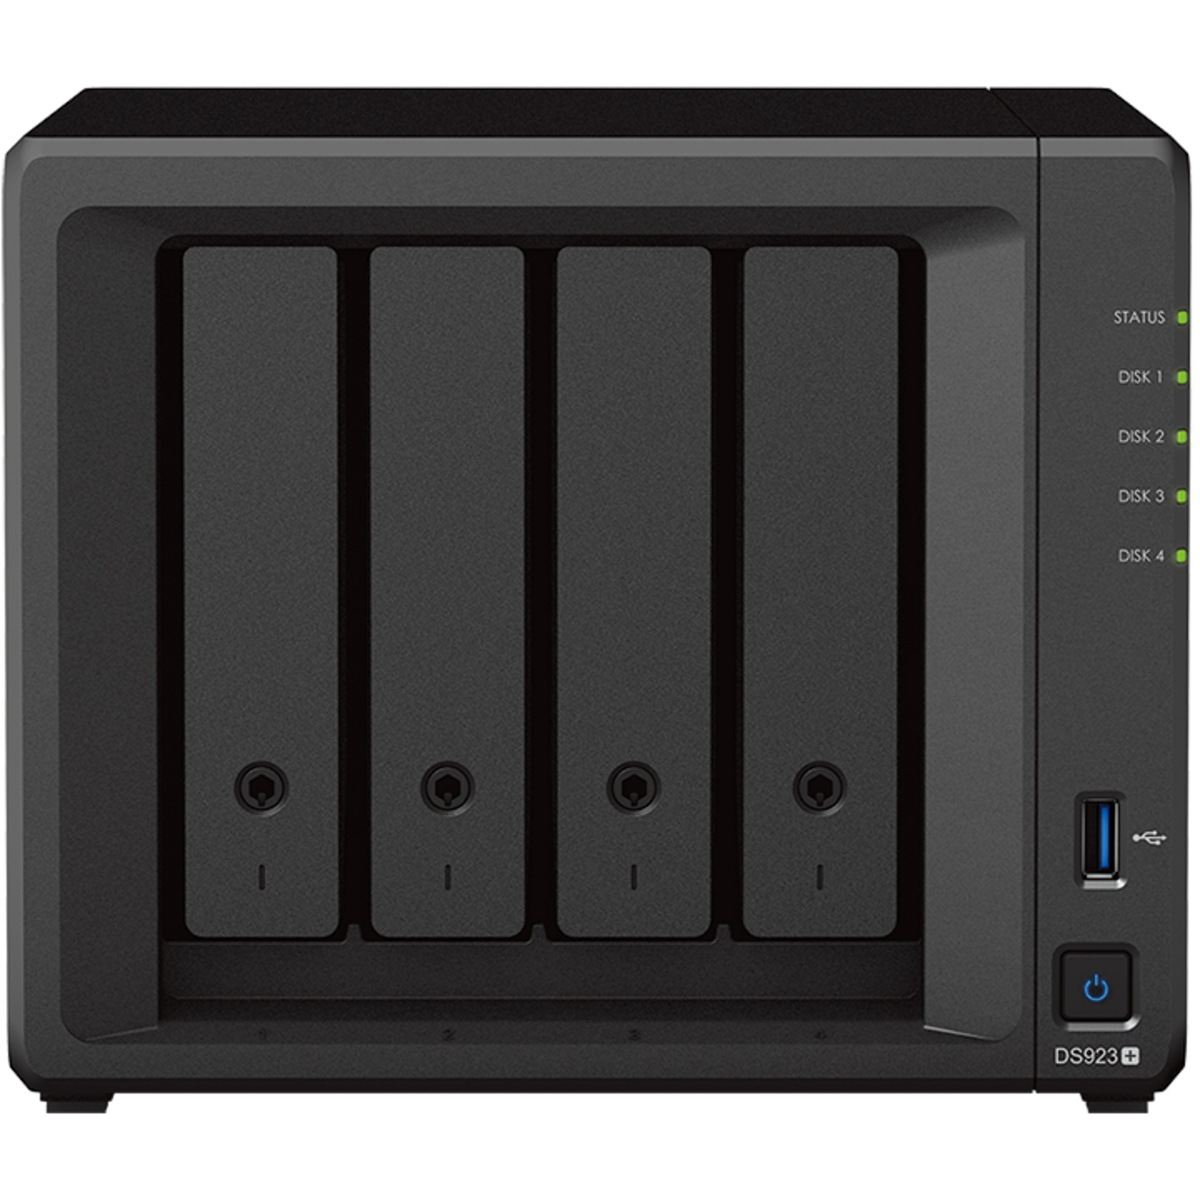 Synology DiskStation DS923+ 48tb 4-Bay Desktop Multimedia / Power User / Business NAS - Network Attached Storage Device 4x12tb Seagate IronWolf Pro ST12000NT001 3.5 7200rpm SATA 6Gb/s HDD NAS Class Drives Installed - Burn-In Tested - ON SALE - FREE RAM UPGRADE DiskStation DS923+